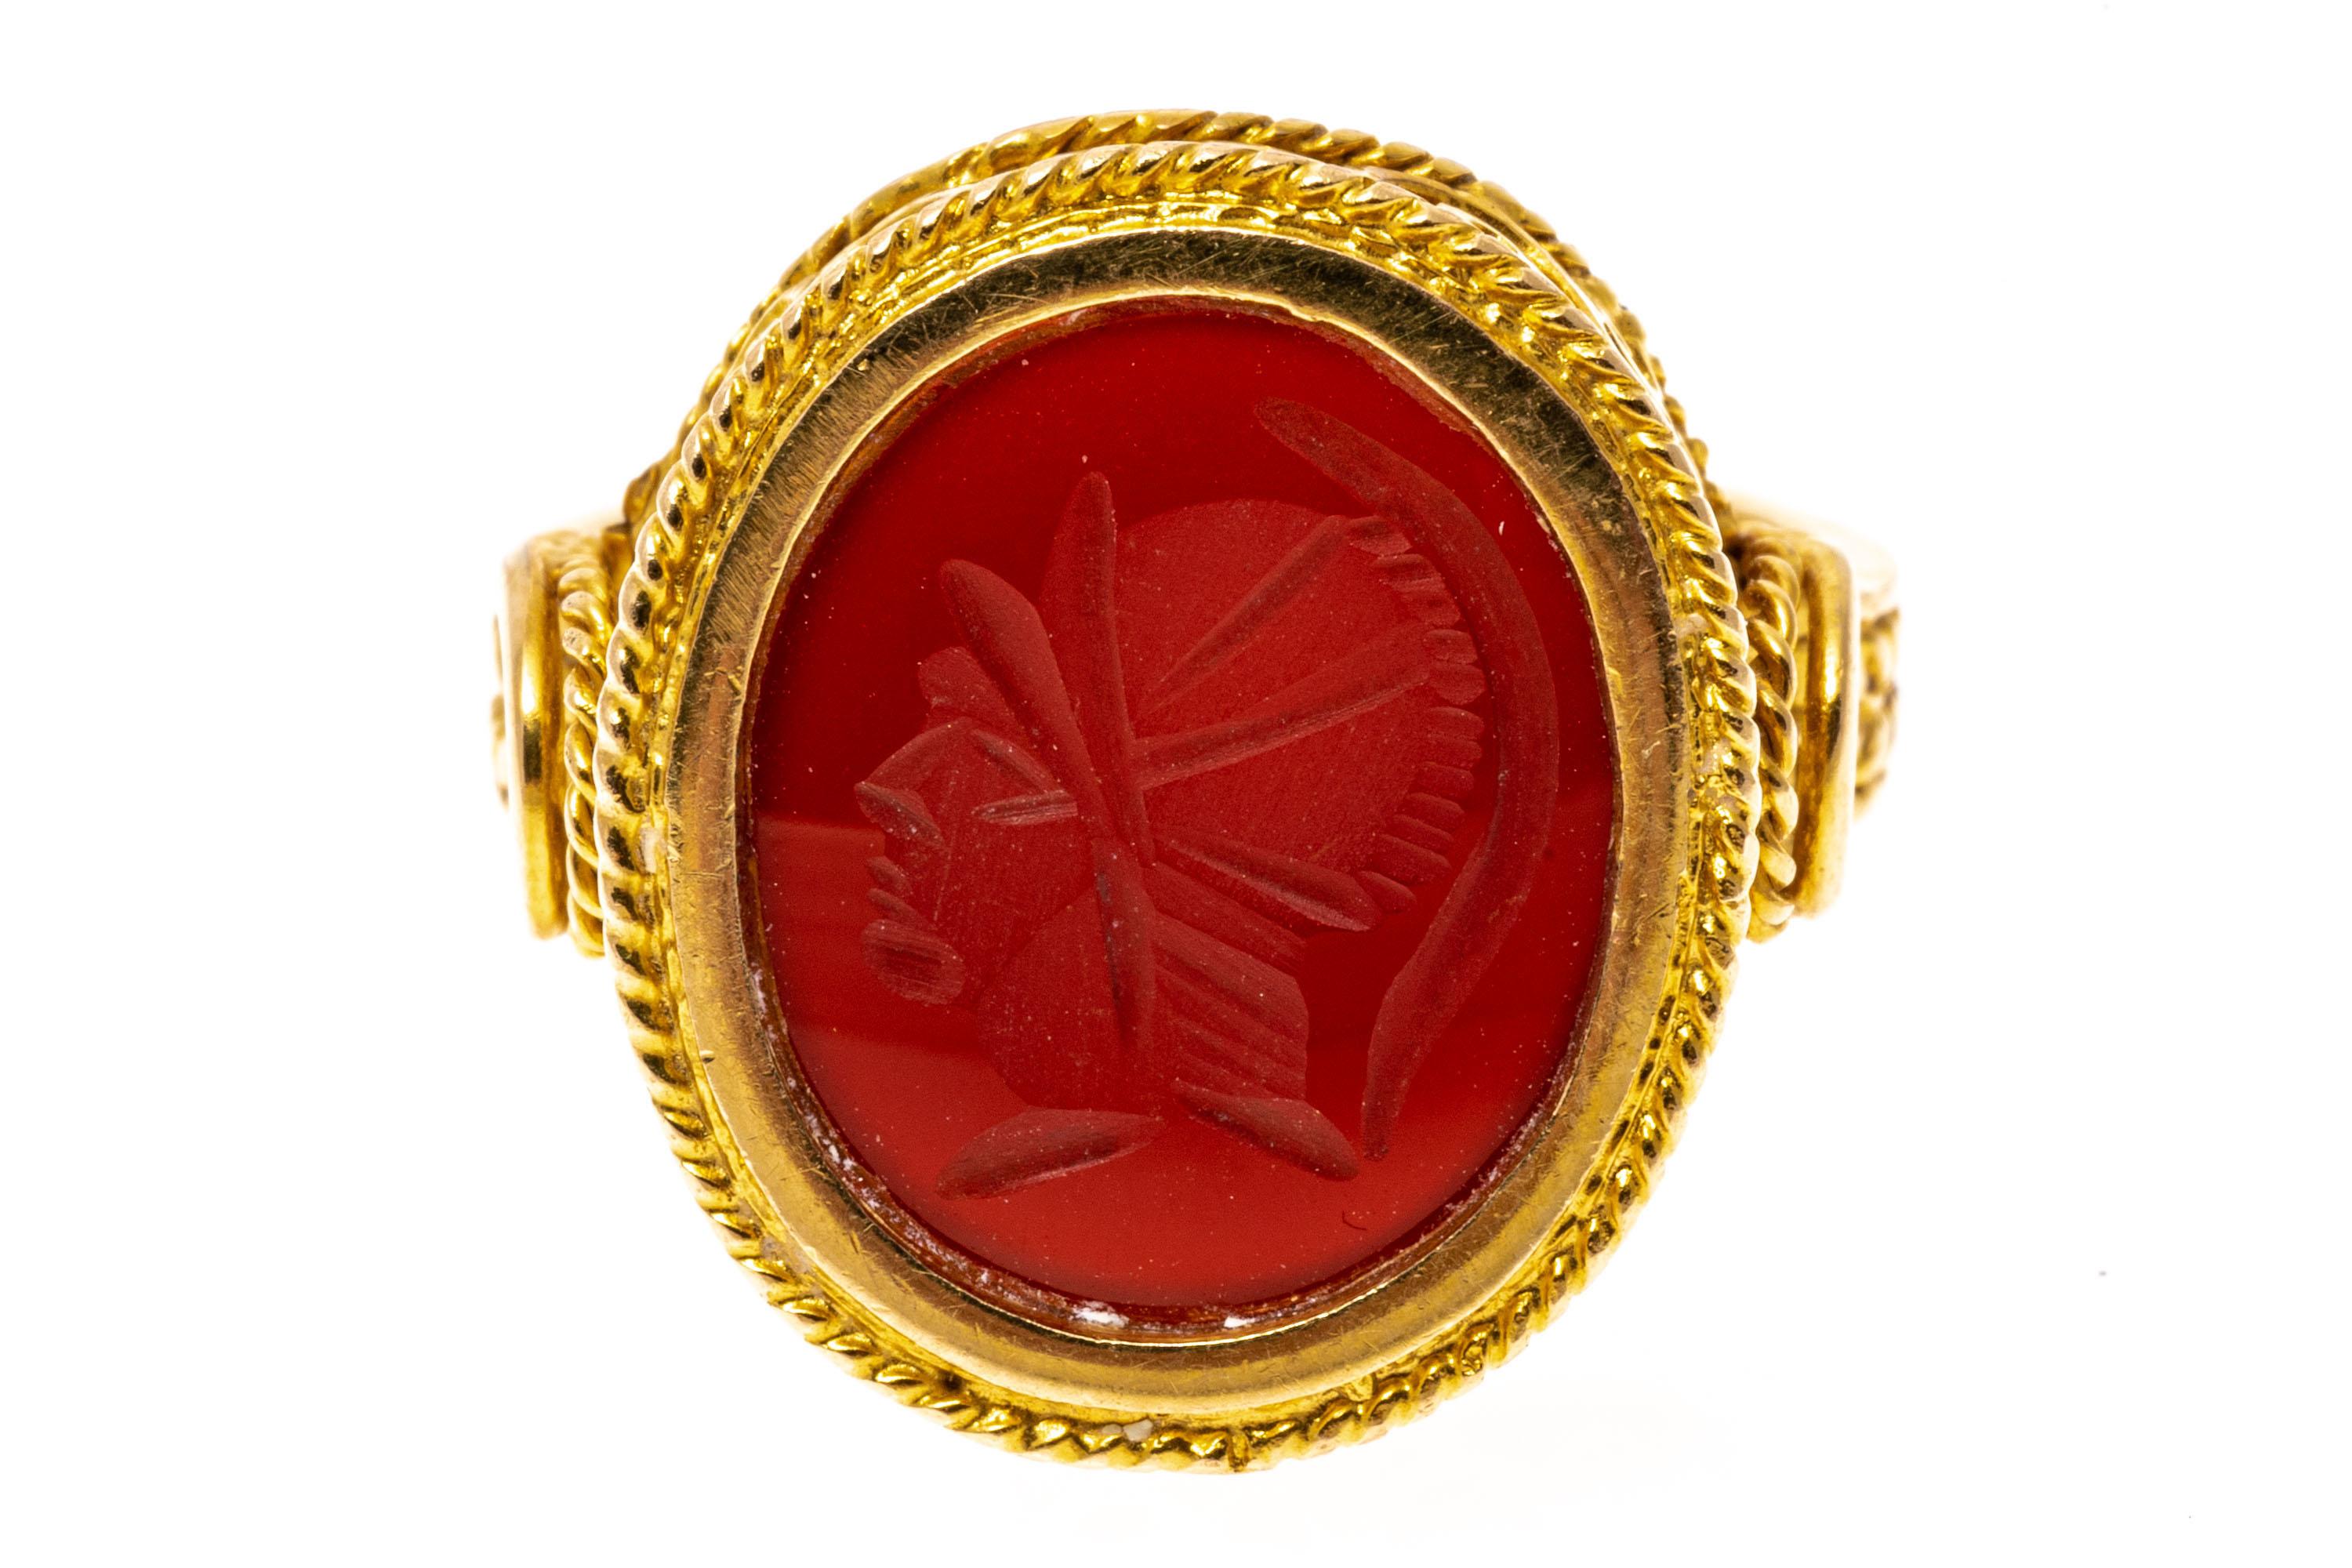 18k yellow gold ring. This attractive contemporary oval carnelian intaglio ring has a handsome figure of a soldier, facing to the left. The ring is also adorned with a braided pattern on the frame and shank, and an ornate scrolled gallery.
Marks: